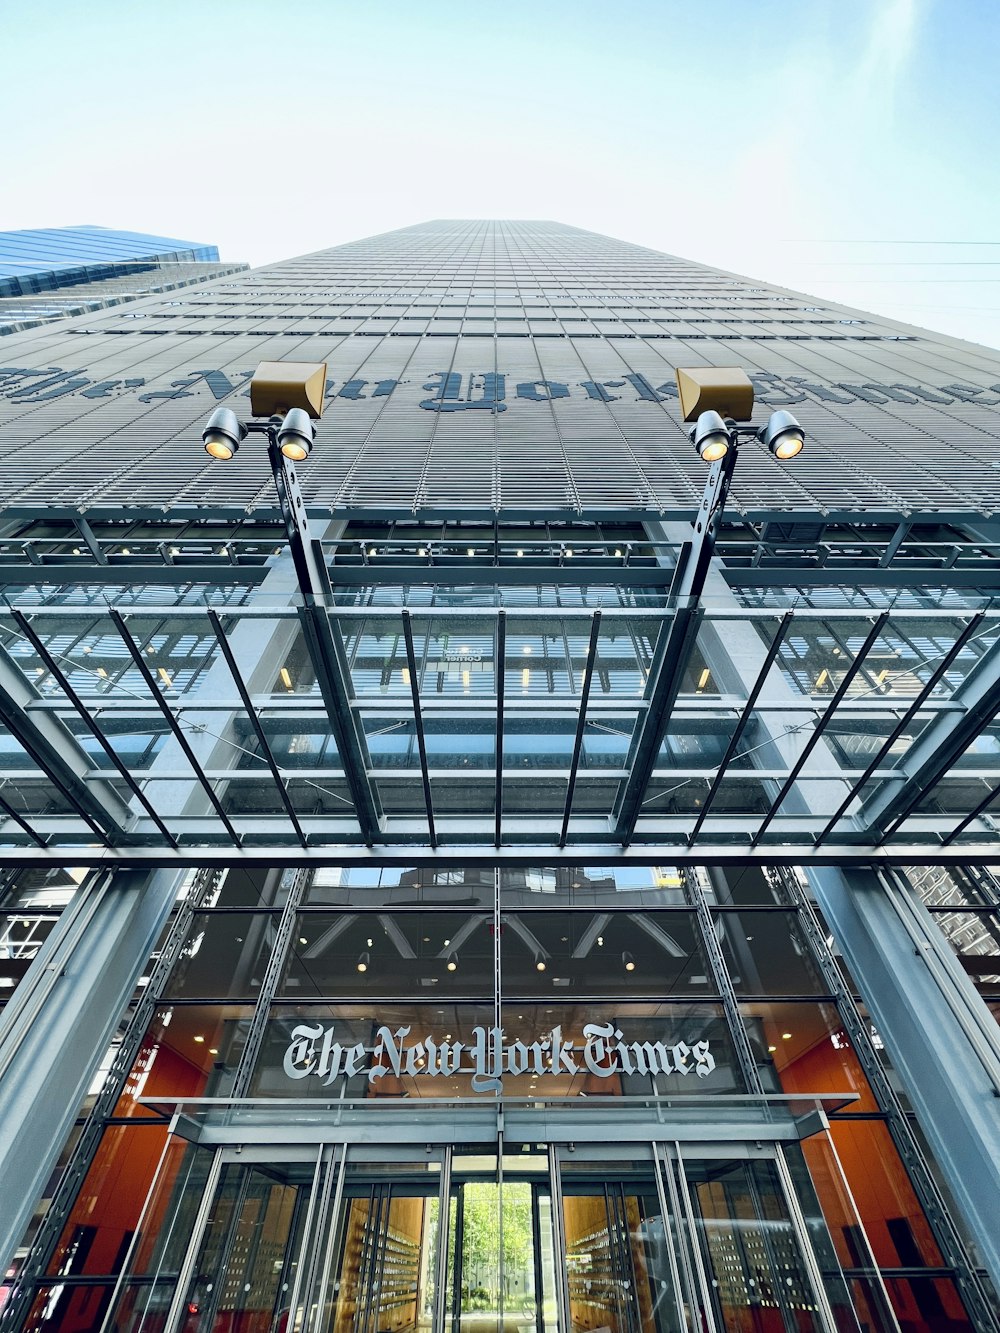 the entrance to the new york times building